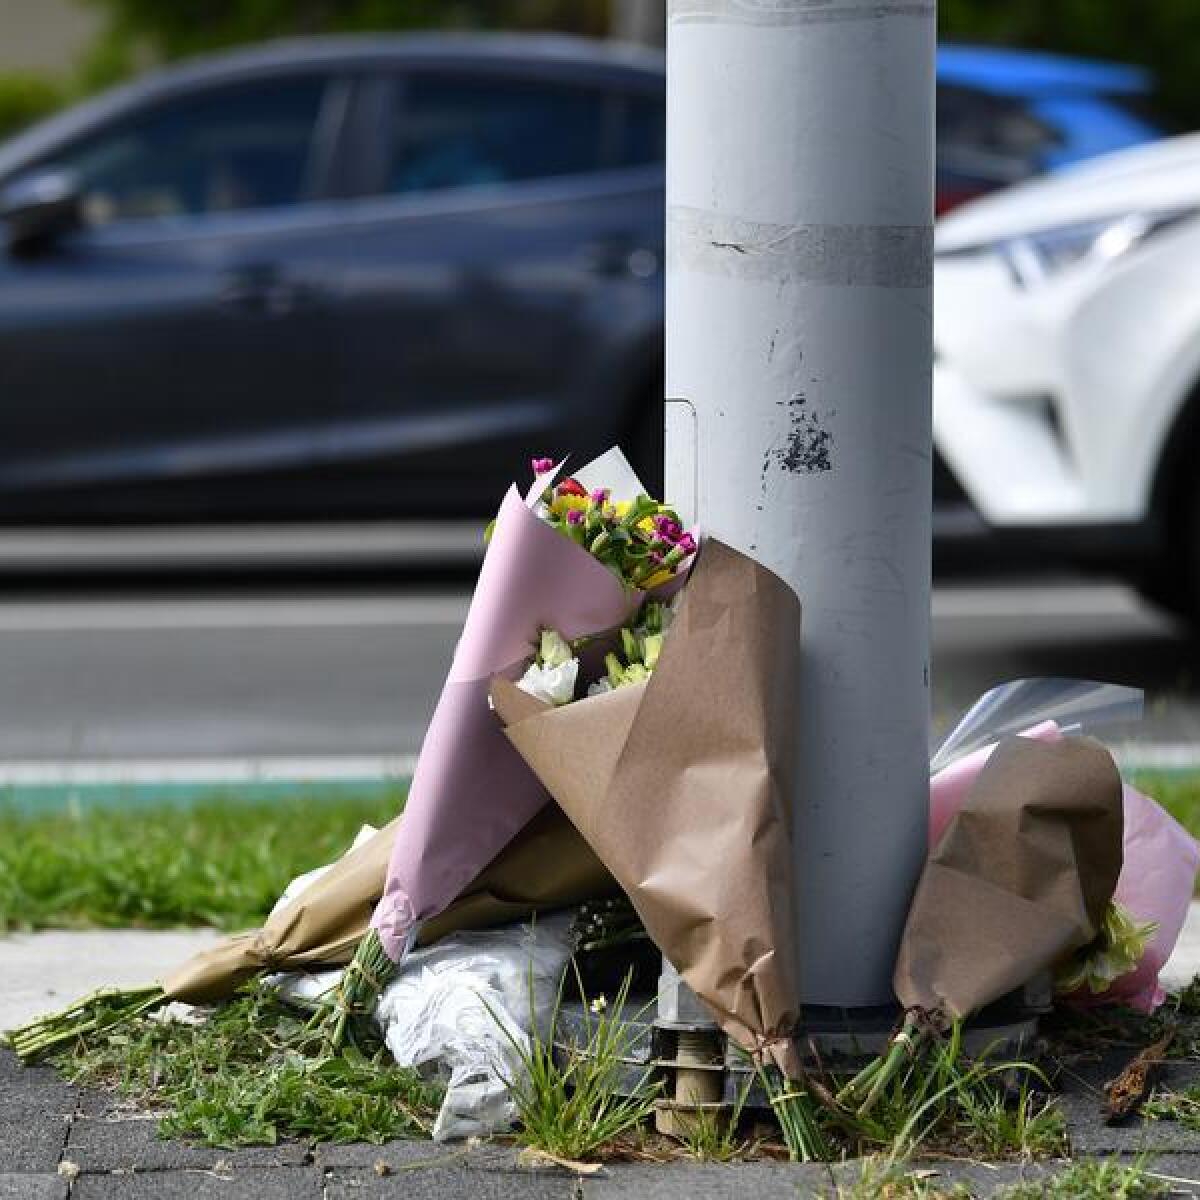 Flowers at the scene of a fatal crash in Alexandra Hills in Brisbane